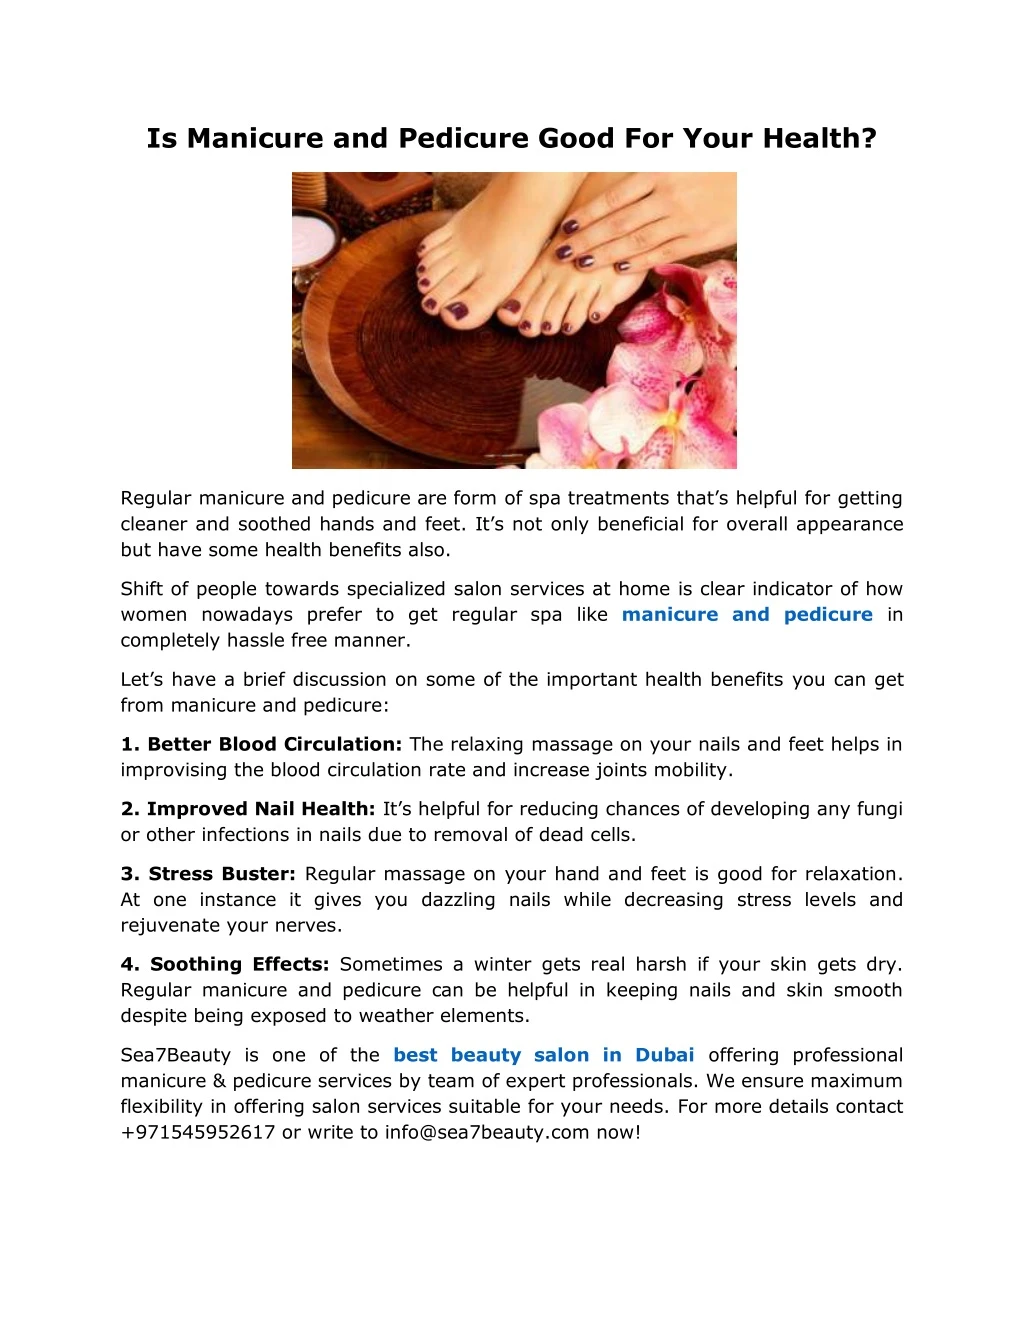 is manicure and pedicure good for your health